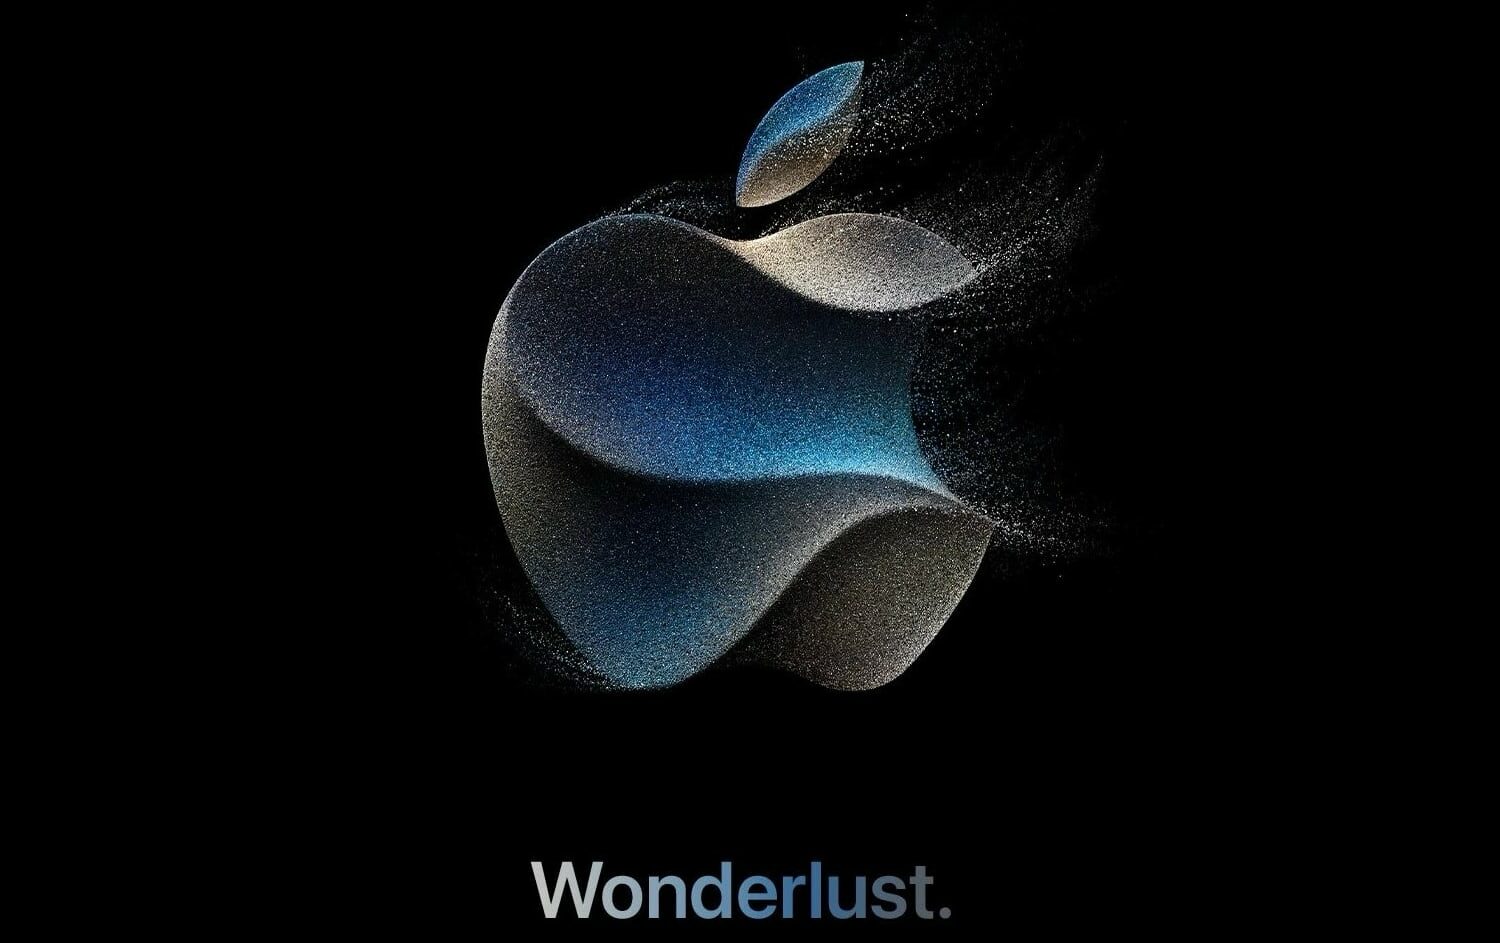 iPhone 15 invite graphic showing a version of the Apple logo with the tagline "Wonderlust"